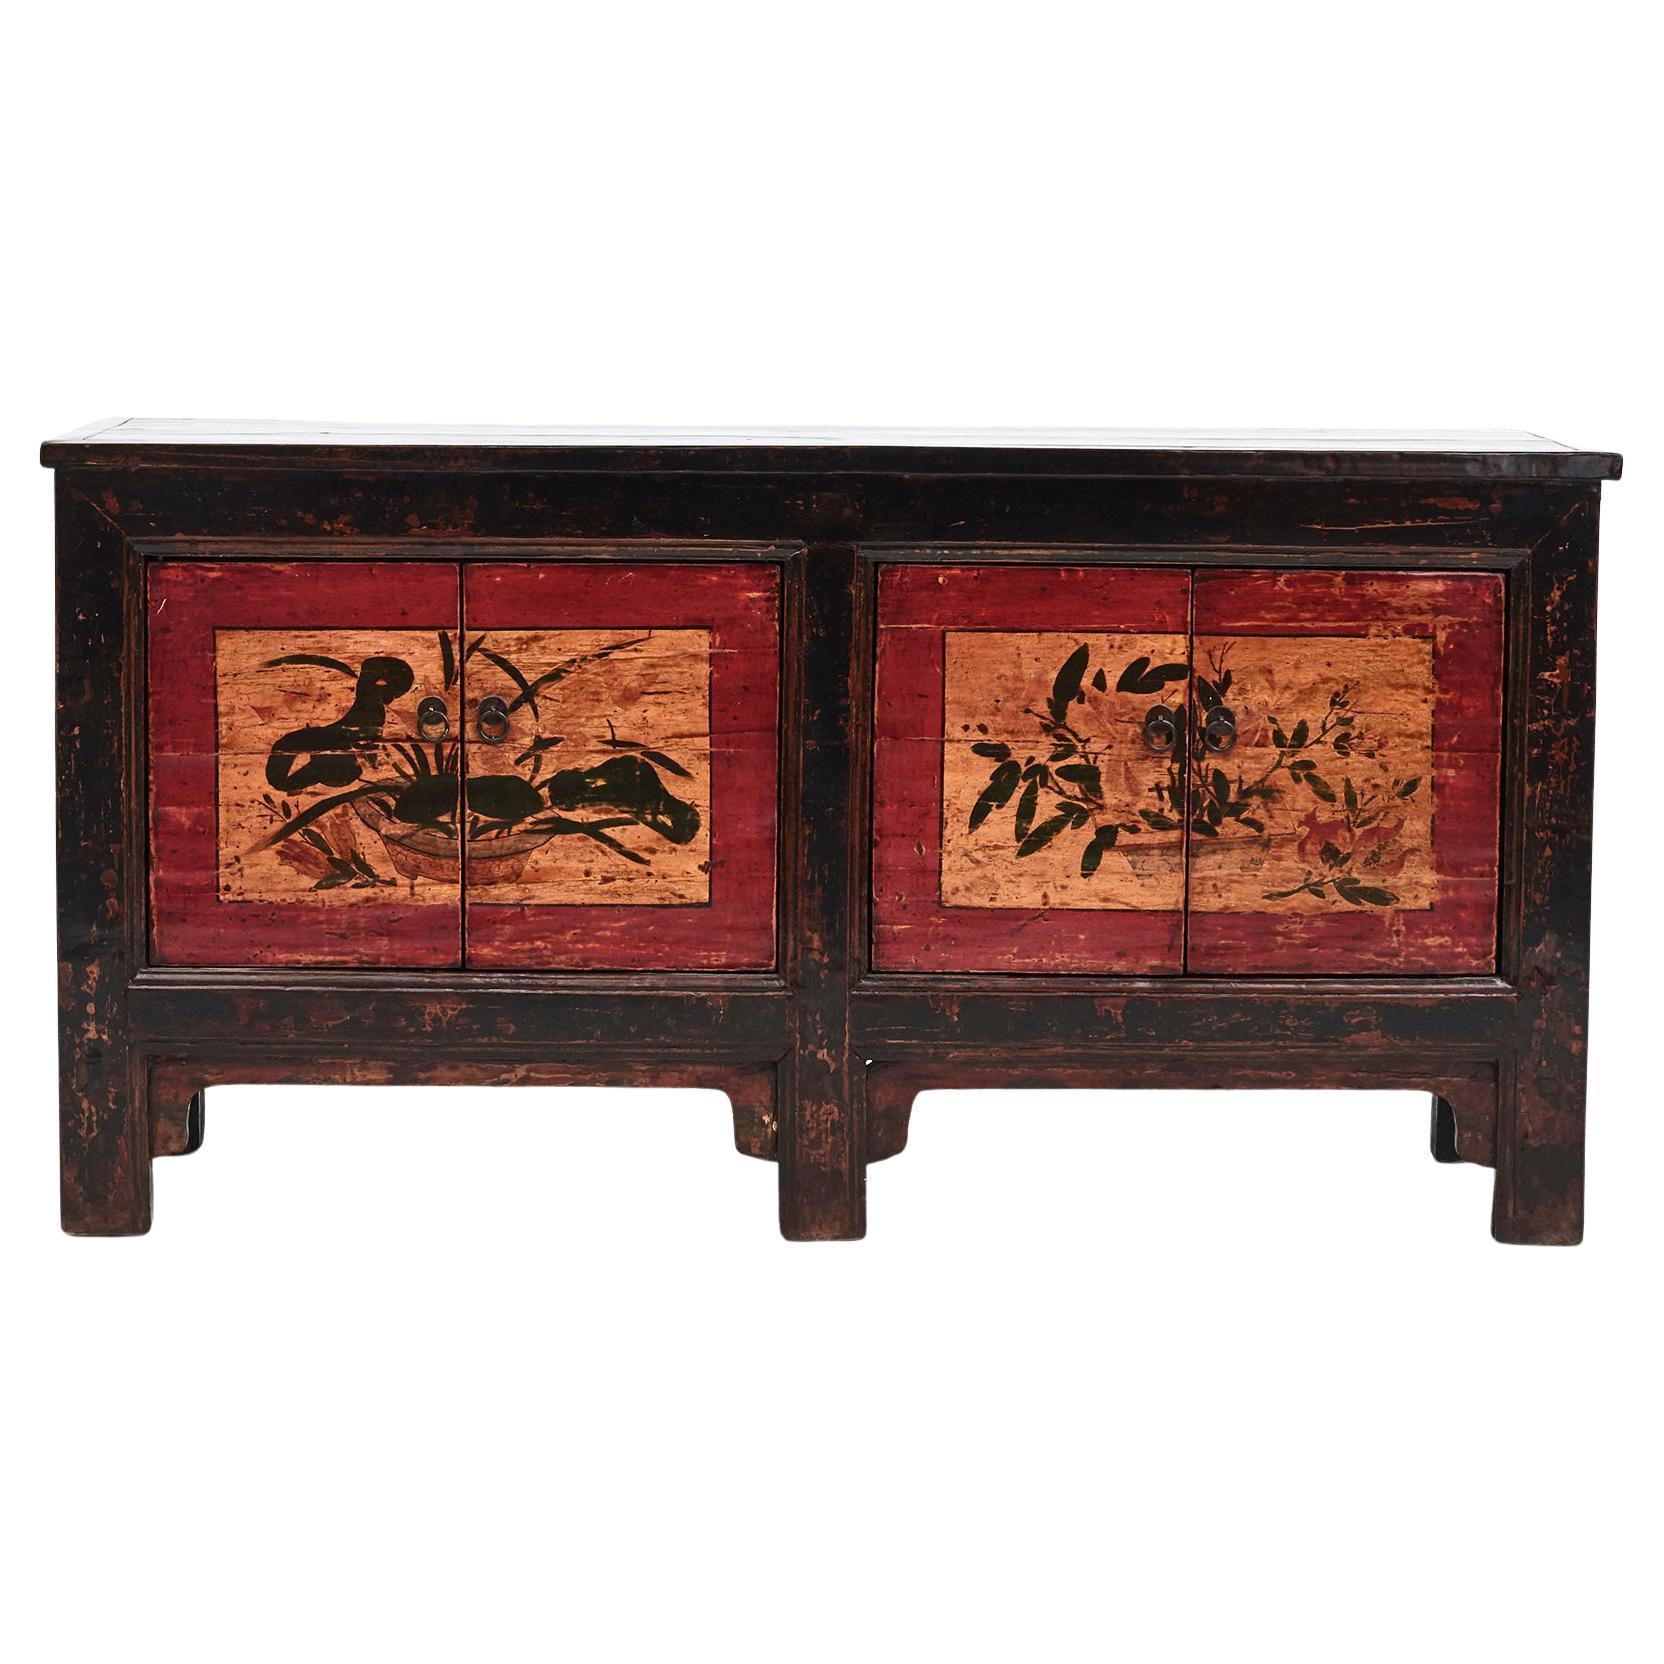 Sideboard From Shandong Province